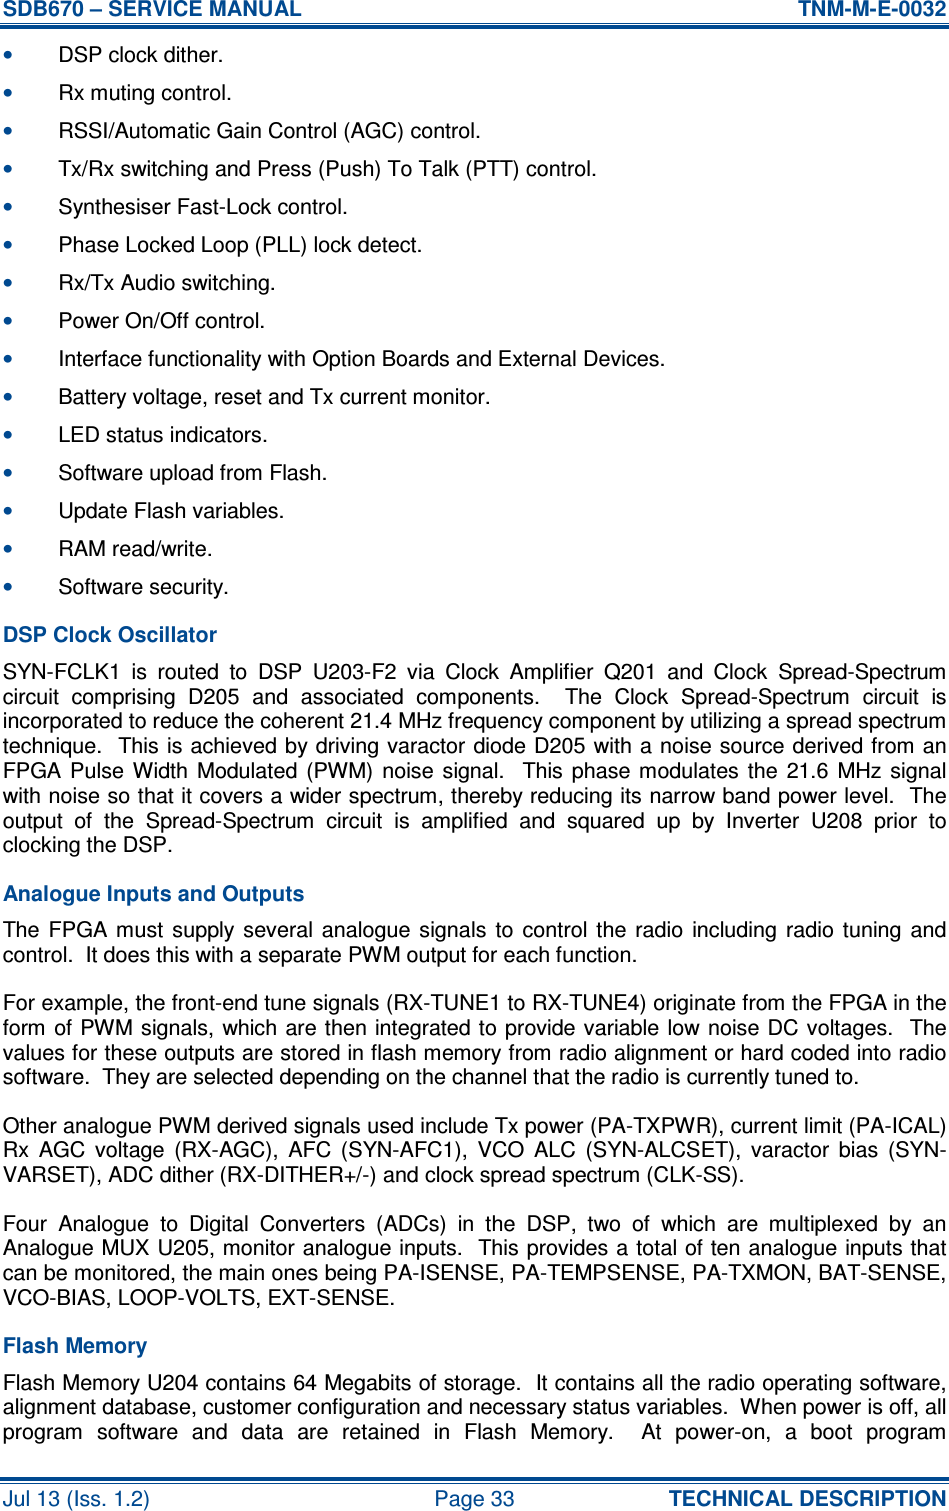 SDB670 – SERVICE MANUAL  TNM-M-E-0032 Jul 13 (Iss. 1.2)  Page 33  TECHNICAL DESCRIPTION • DSP clock dither. • Rx muting control. • RSSI/Automatic Gain Control (AGC) control. • Tx/Rx switching and Press (Push) To Talk (PTT) control. • Synthesiser Fast-Lock control. • Phase Locked Loop (PLL) lock detect. • Rx/Tx Audio switching. • Power On/Off control. • Interface functionality with Option Boards and External Devices. • Battery voltage, reset and Tx current monitor. • LED status indicators. • Software upload from Flash. • Update Flash variables. • RAM read/write. • Software security. DSP Clock Oscillator SYN-FCLK1  is  routed  to  DSP  U203-F2  via  Clock  Amplifier  Q201  and  Clock  Spread-Spectrum circuit  comprising  D205  and  associated  components.    The  Clock  Spread-Spectrum  circuit  is incorporated to reduce the coherent 21.4 MHz frequency component by utilizing a spread spectrum technique.  This is achieved by driving varactor diode D205 with a noise source derived from an FPGA Pulse  Width  Modulated  (PWM)  noise  signal.   This phase modulates  the  21.6  MHz  signal with noise so that it covers a wider spectrum, thereby reducing its narrow band power level.  The output  of  the  Spread-Spectrum  circuit  is  amplified  and  squared  up  by  Inverter  U208  prior  to clocking the DSP. Analogue Inputs and Outputs The FPGA  must  supply  several  analogue  signals  to  control  the  radio  including  radio  tuning  and control.  It does this with a separate PWM output for each function. For example, the front-end tune signals (RX-TUNE1 to RX-TUNE4) originate from the FPGA in the form of PWM signals, which are then integrated to provide variable low noise DC voltages.  The values for these outputs are stored in flash memory from radio alignment or hard coded into radio software.  They are selected depending on the channel that the radio is currently tuned to. Other analogue PWM derived signals used include Tx power (PA-TXPWR), current limit (PA-ICAL) Rx  AGC  voltage  (RX-AGC),  AFC  (SYN-AFC1),  VCO  ALC  (SYN-ALCSET),  varactor  bias  (SYN-VARSET), ADC dither (RX-DITHER+/-) and clock spread spectrum (CLK-SS). Four  Analogue  to  Digital  Converters  (ADCs)  in  the  DSP,  two  of  which  are  multiplexed  by  an Analogue MUX U205, monitor analogue inputs.  This provides a total of ten analogue inputs that can be monitored, the main ones being PA-ISENSE, PA-TEMPSENSE, PA-TXMON, BAT-SENSE, VCO-BIAS, LOOP-VOLTS, EXT-SENSE. Flash Memory Flash Memory U204 contains 64 Megabits of storage.  It contains all the radio operating software, alignment database, customer configuration and necessary status variables.  When power is off, all program  software  and  data  are  retained  in  Flash  Memory.    At  power-on,  a  boot  program 